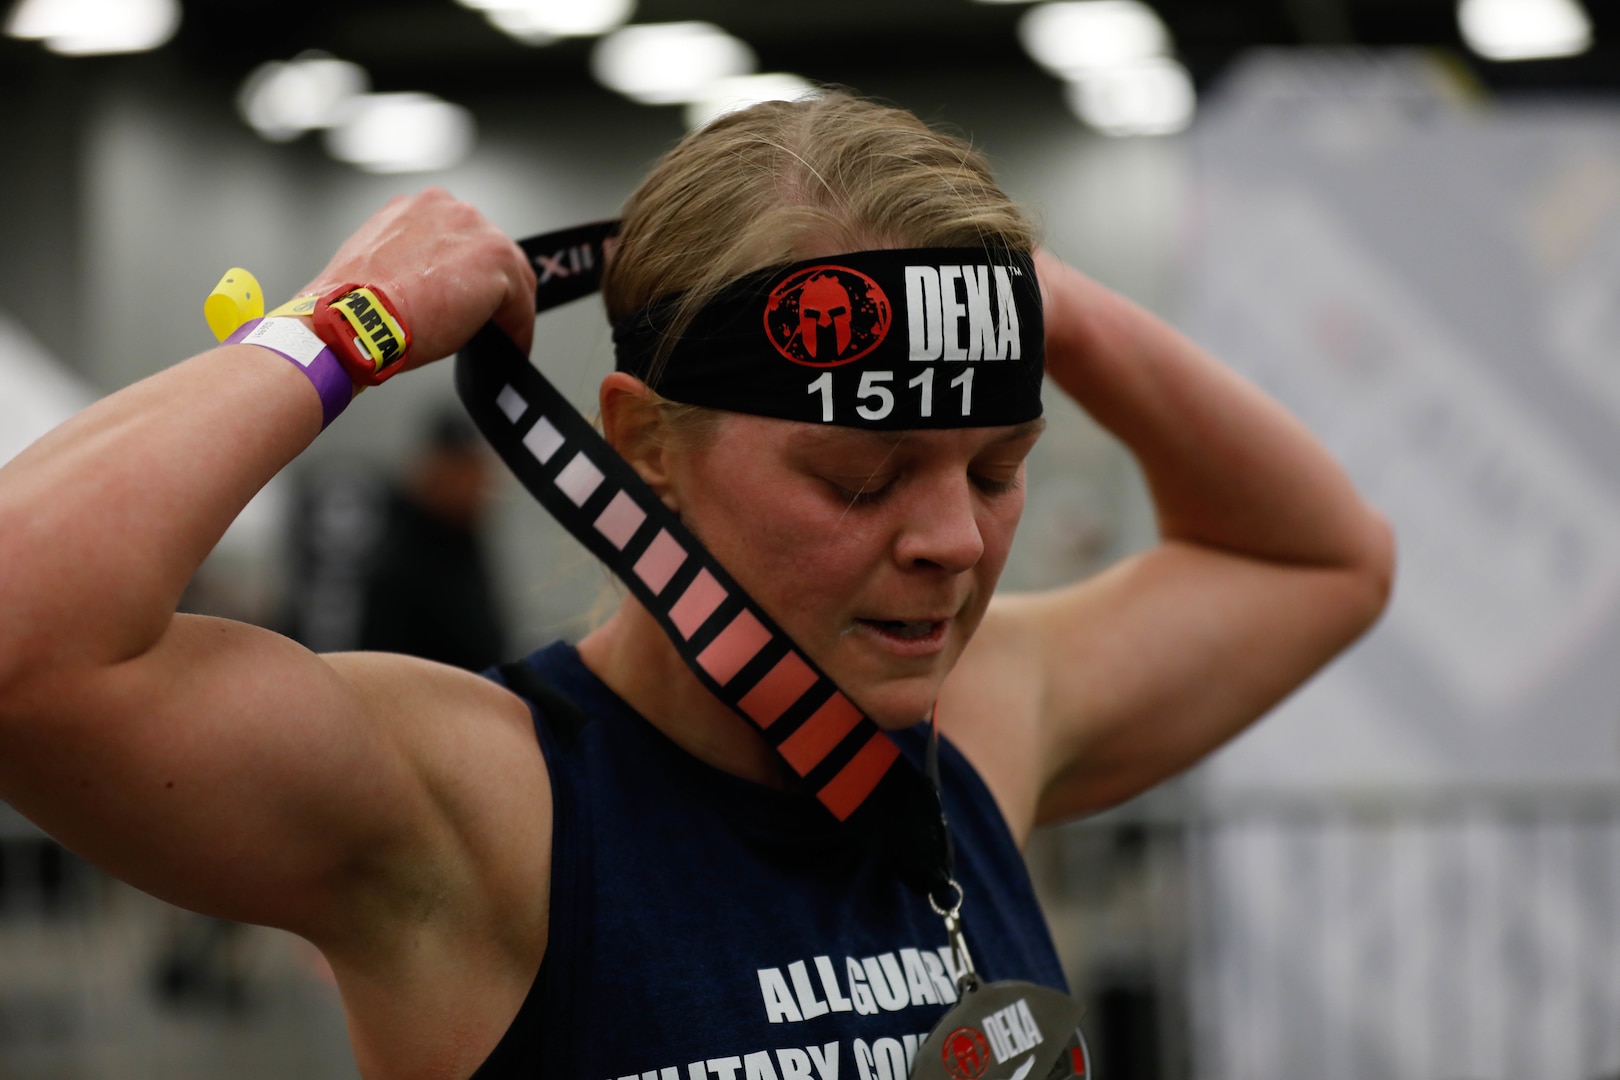 U.S. Army Maj. Samantha Wood, a medical specialist officer with Joint Forces Headquarters, California National Guard, places her medal around her neck after crossing the finish line of the Spartan DEKA FIT, a fitness competition that consists of 10 events, each preceded by a 500-meter run, in Austin, Texas, Jan. 15, 2022. Wood placed first overall among the National Guard women competing for a spot on the All Guard team.